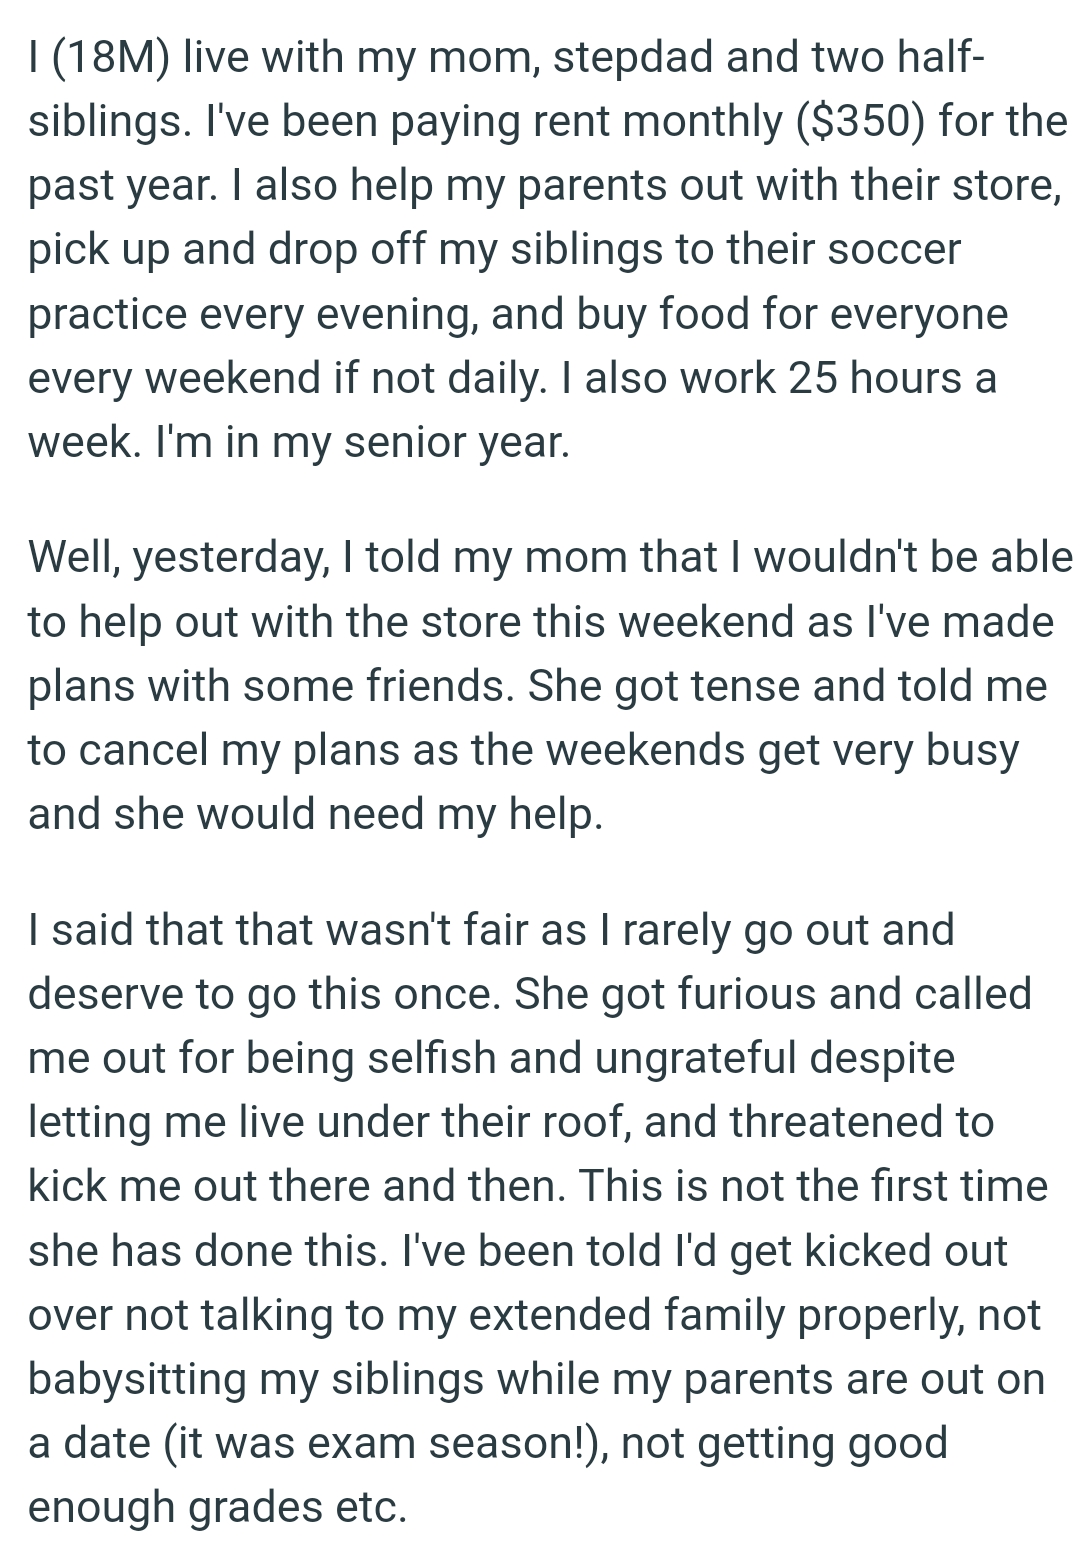 OP's mom got tensed and told him to cancel his plans